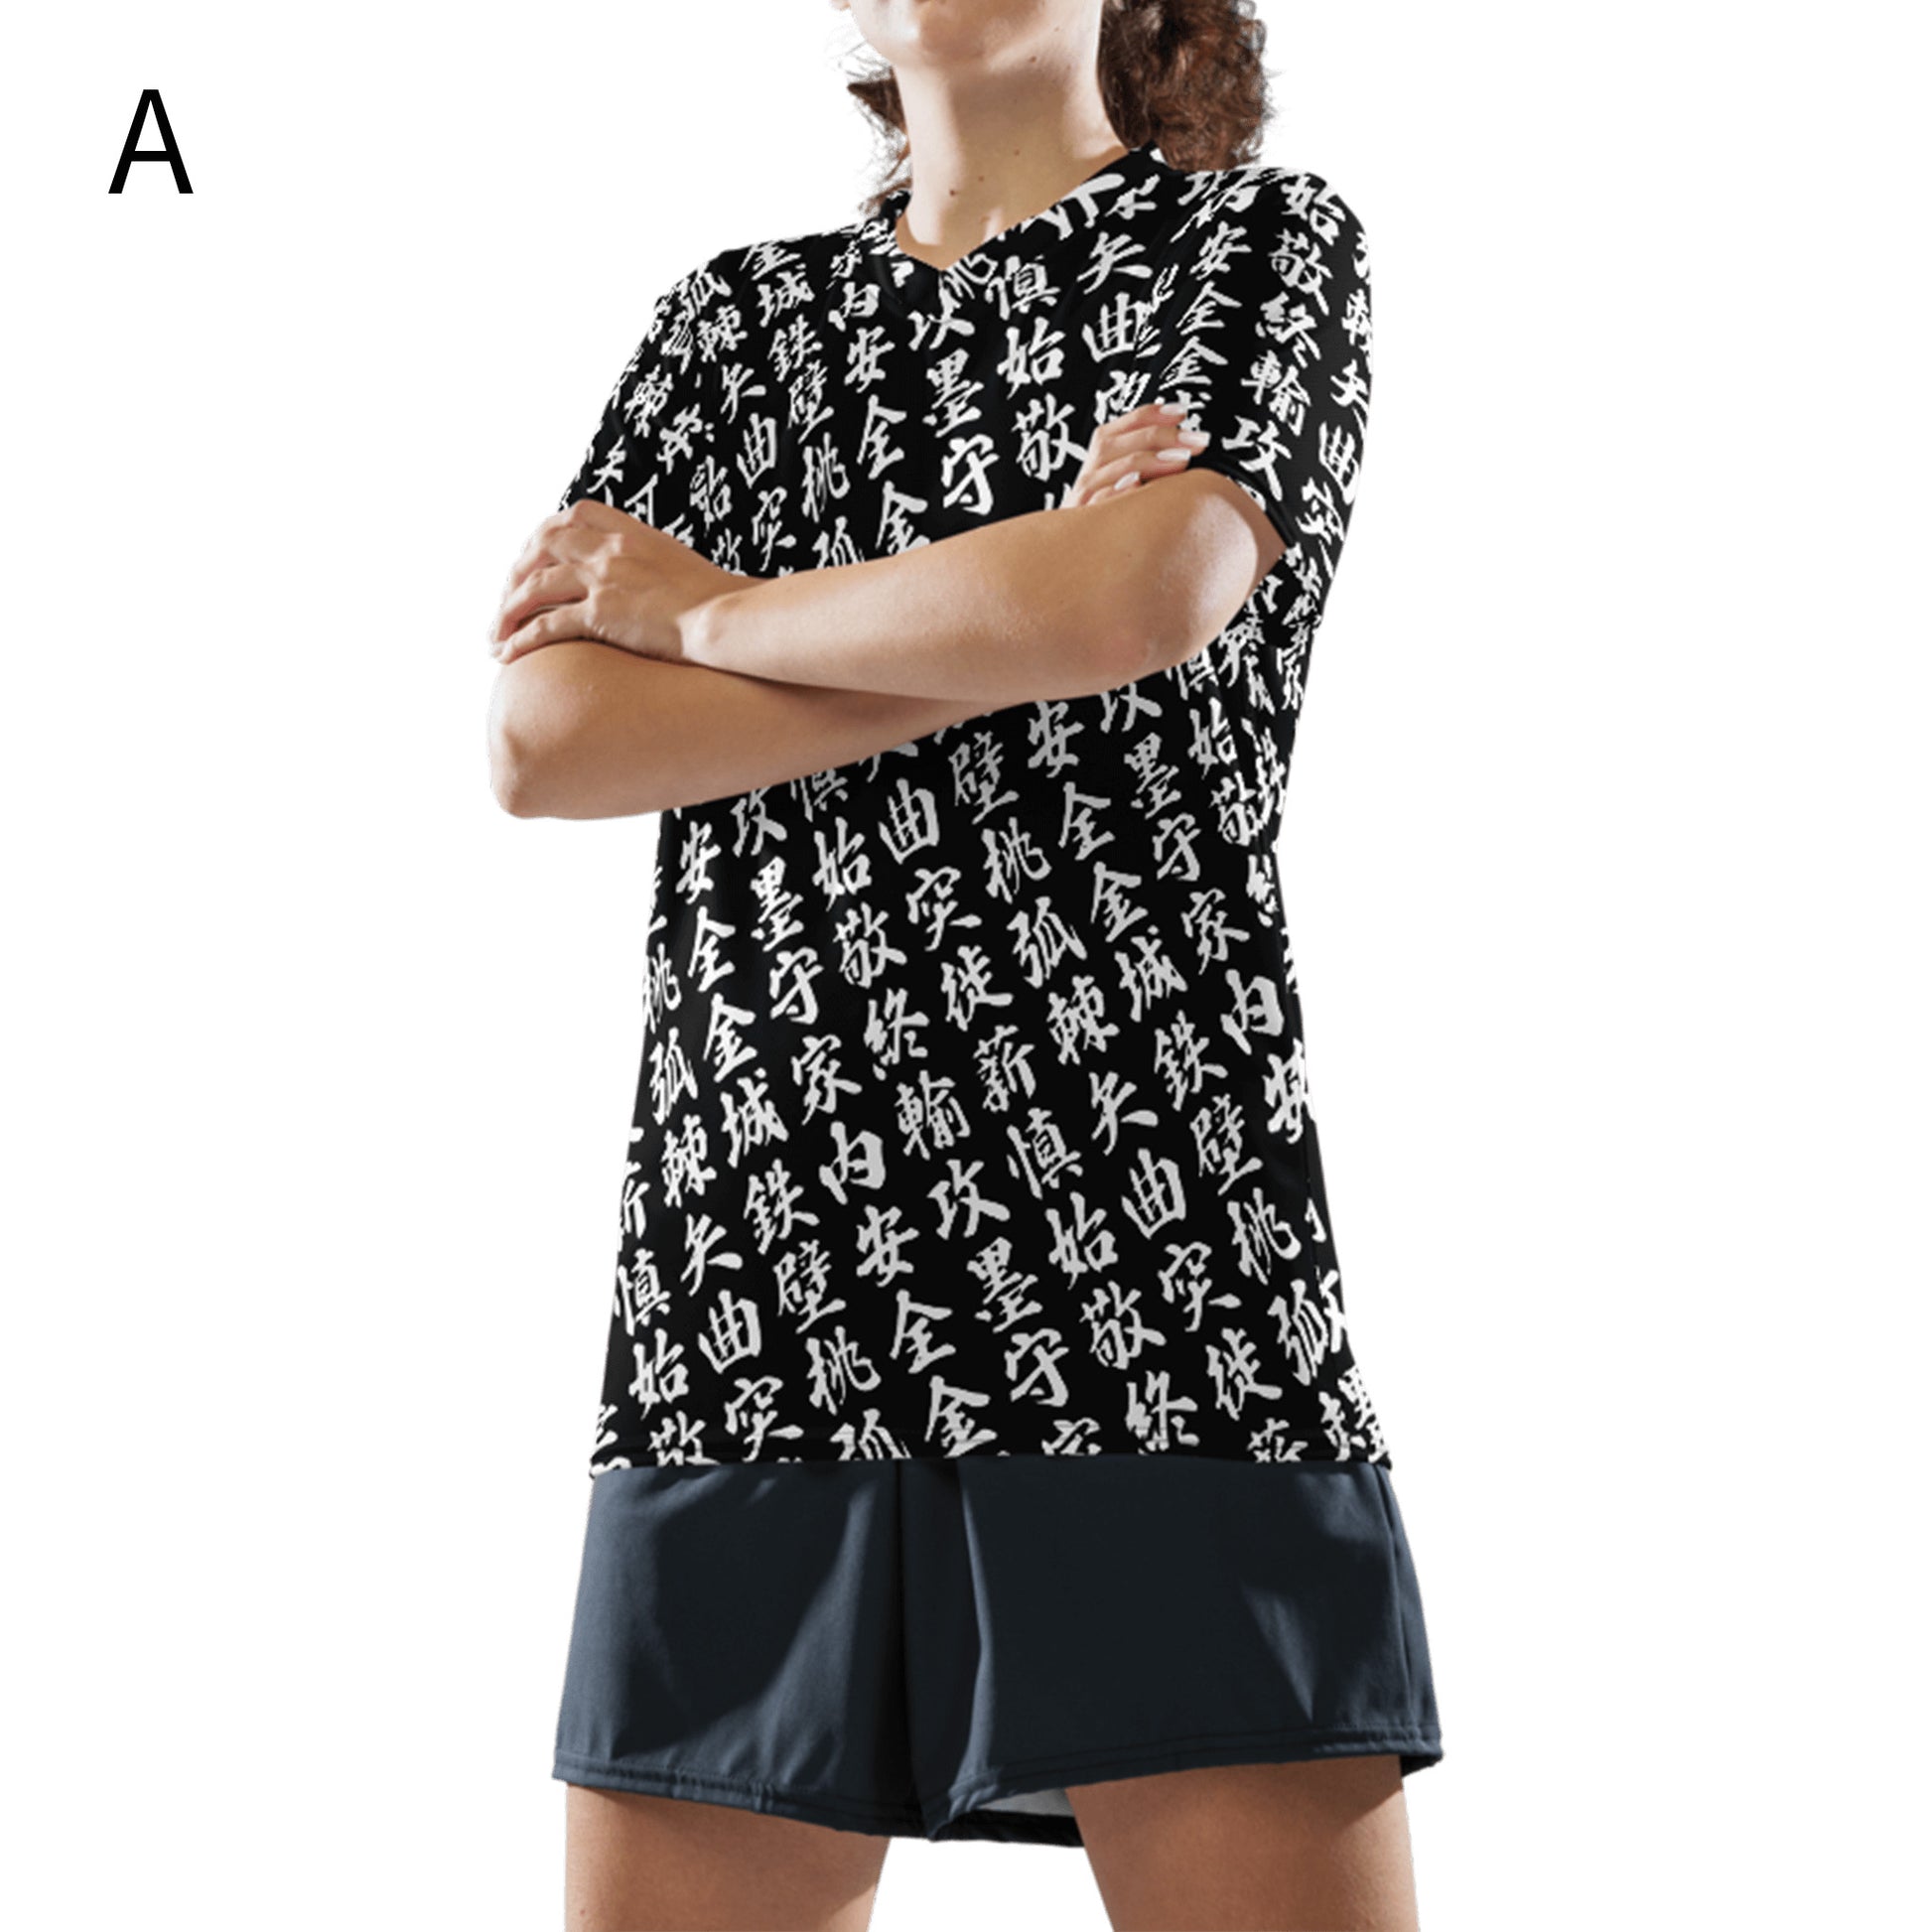 Unisex black Sports Jersey with all-over print in Japanese KANJI- woman model A-1